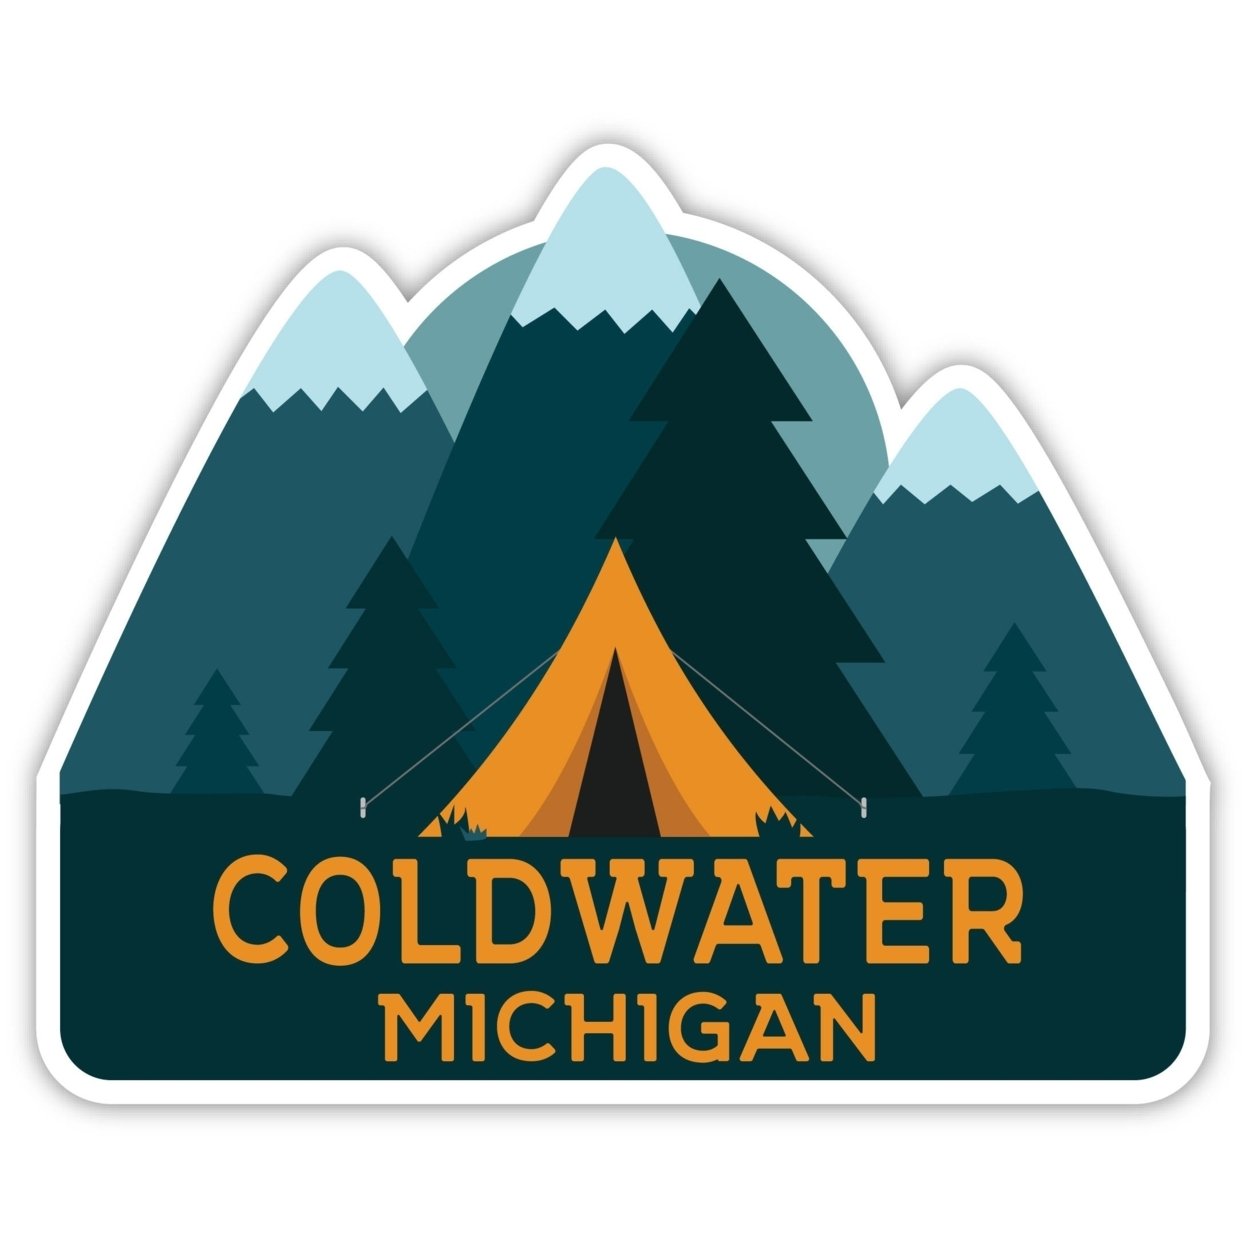 Coldwater Michigan Souvenir Decorative Stickers (Choose Theme And Size) - 4-Pack, 4-Inch, Tent